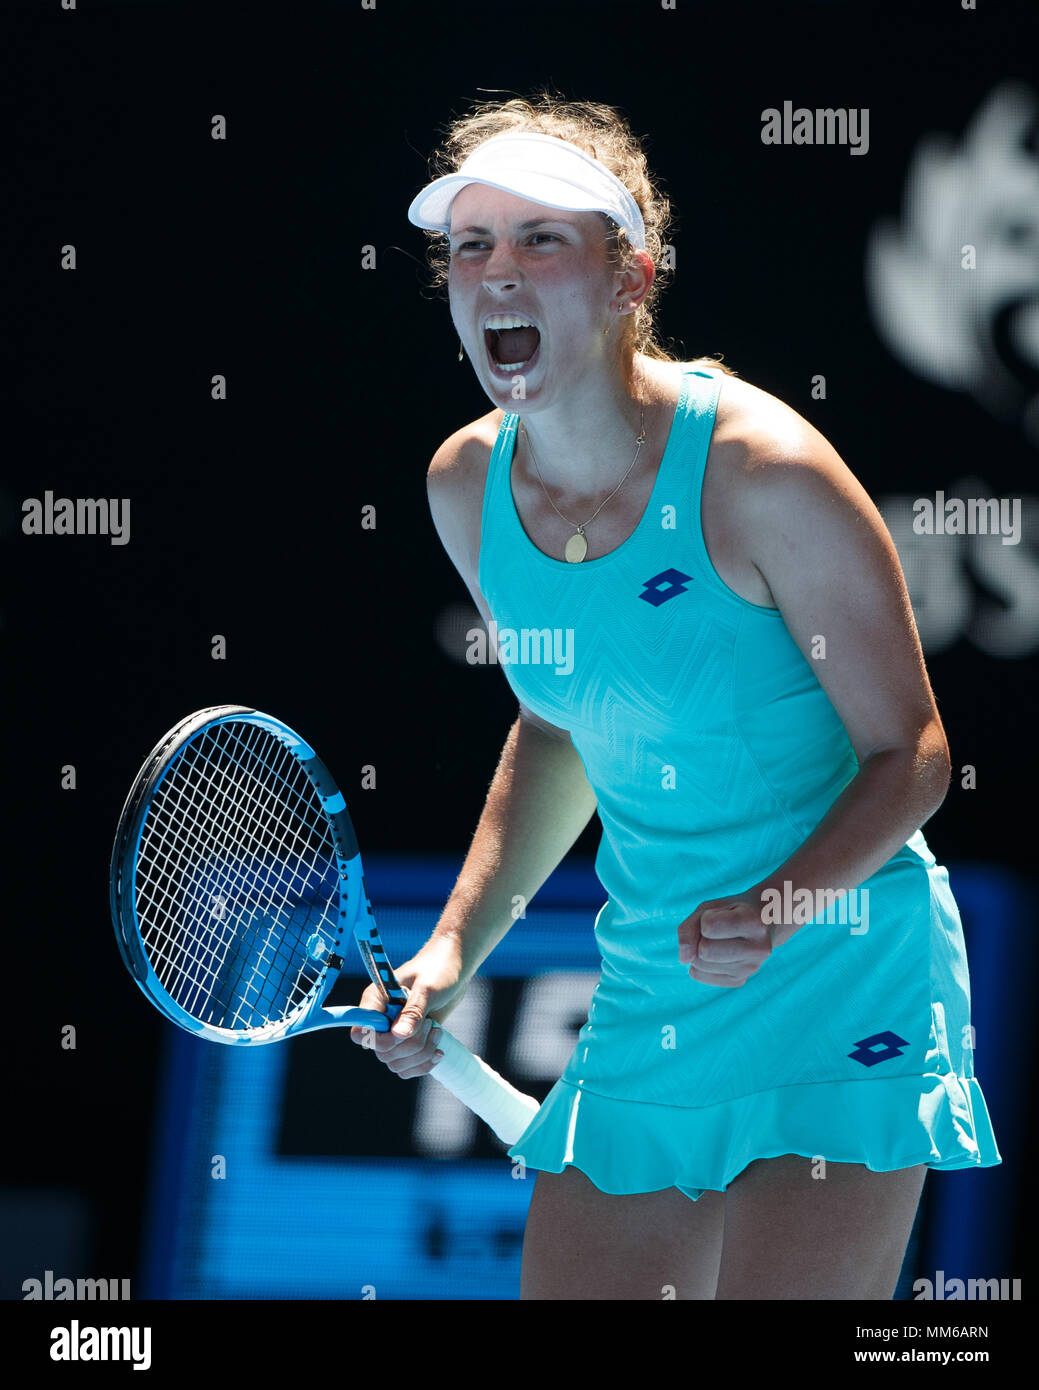 Elise mertens womens tennis hi-res stock photography and images - Alamy